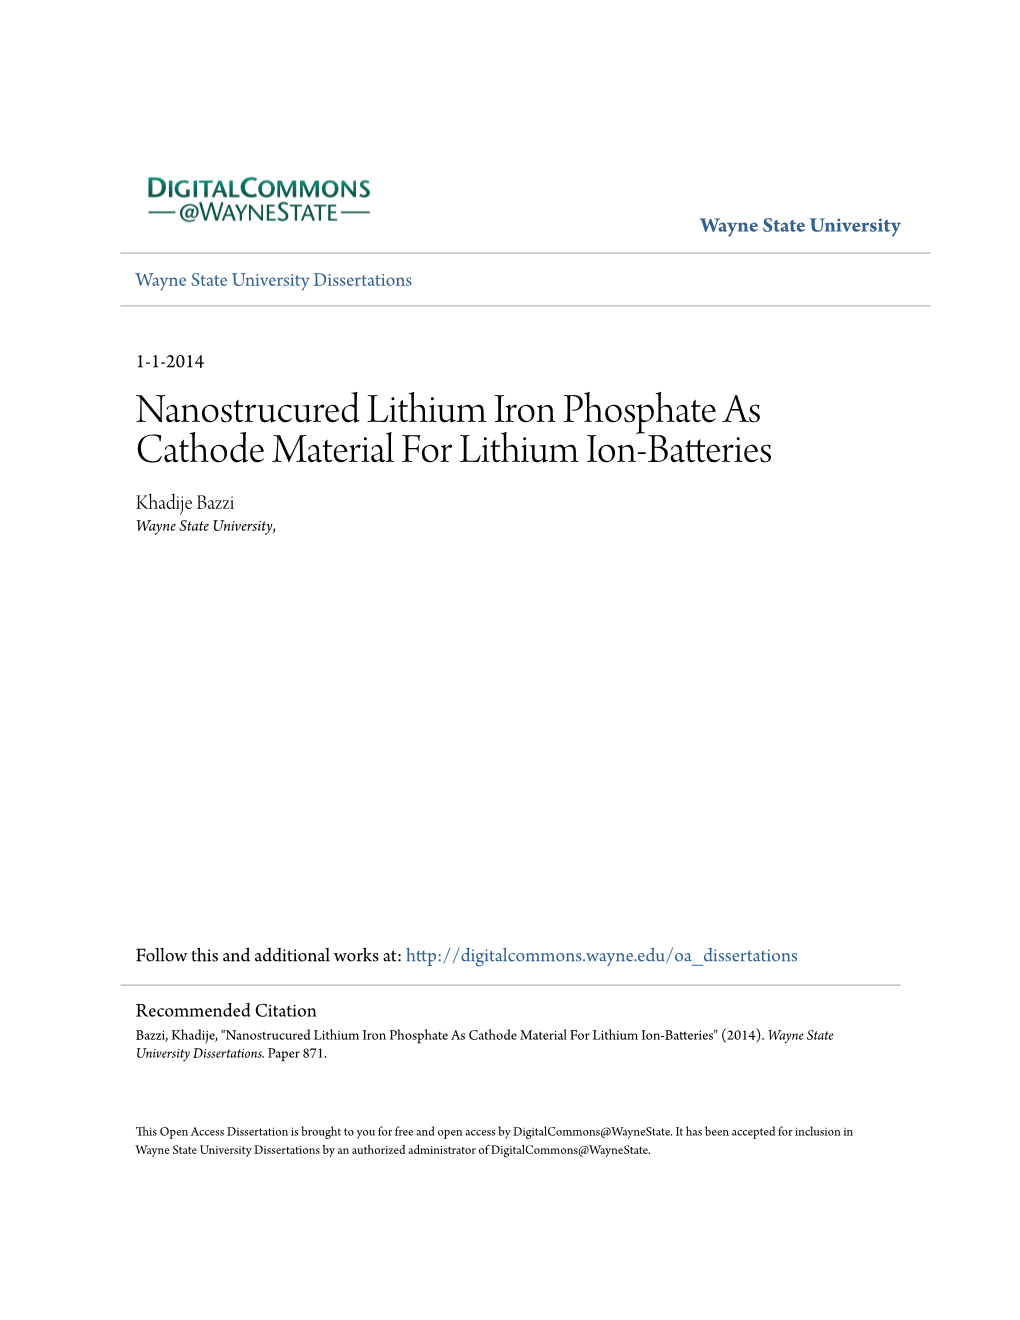 Nanostrucured Lithium Iron Phosphate As Cathode Material for Lithium Ion-Batteries Khadije Bazzi Wayne State University